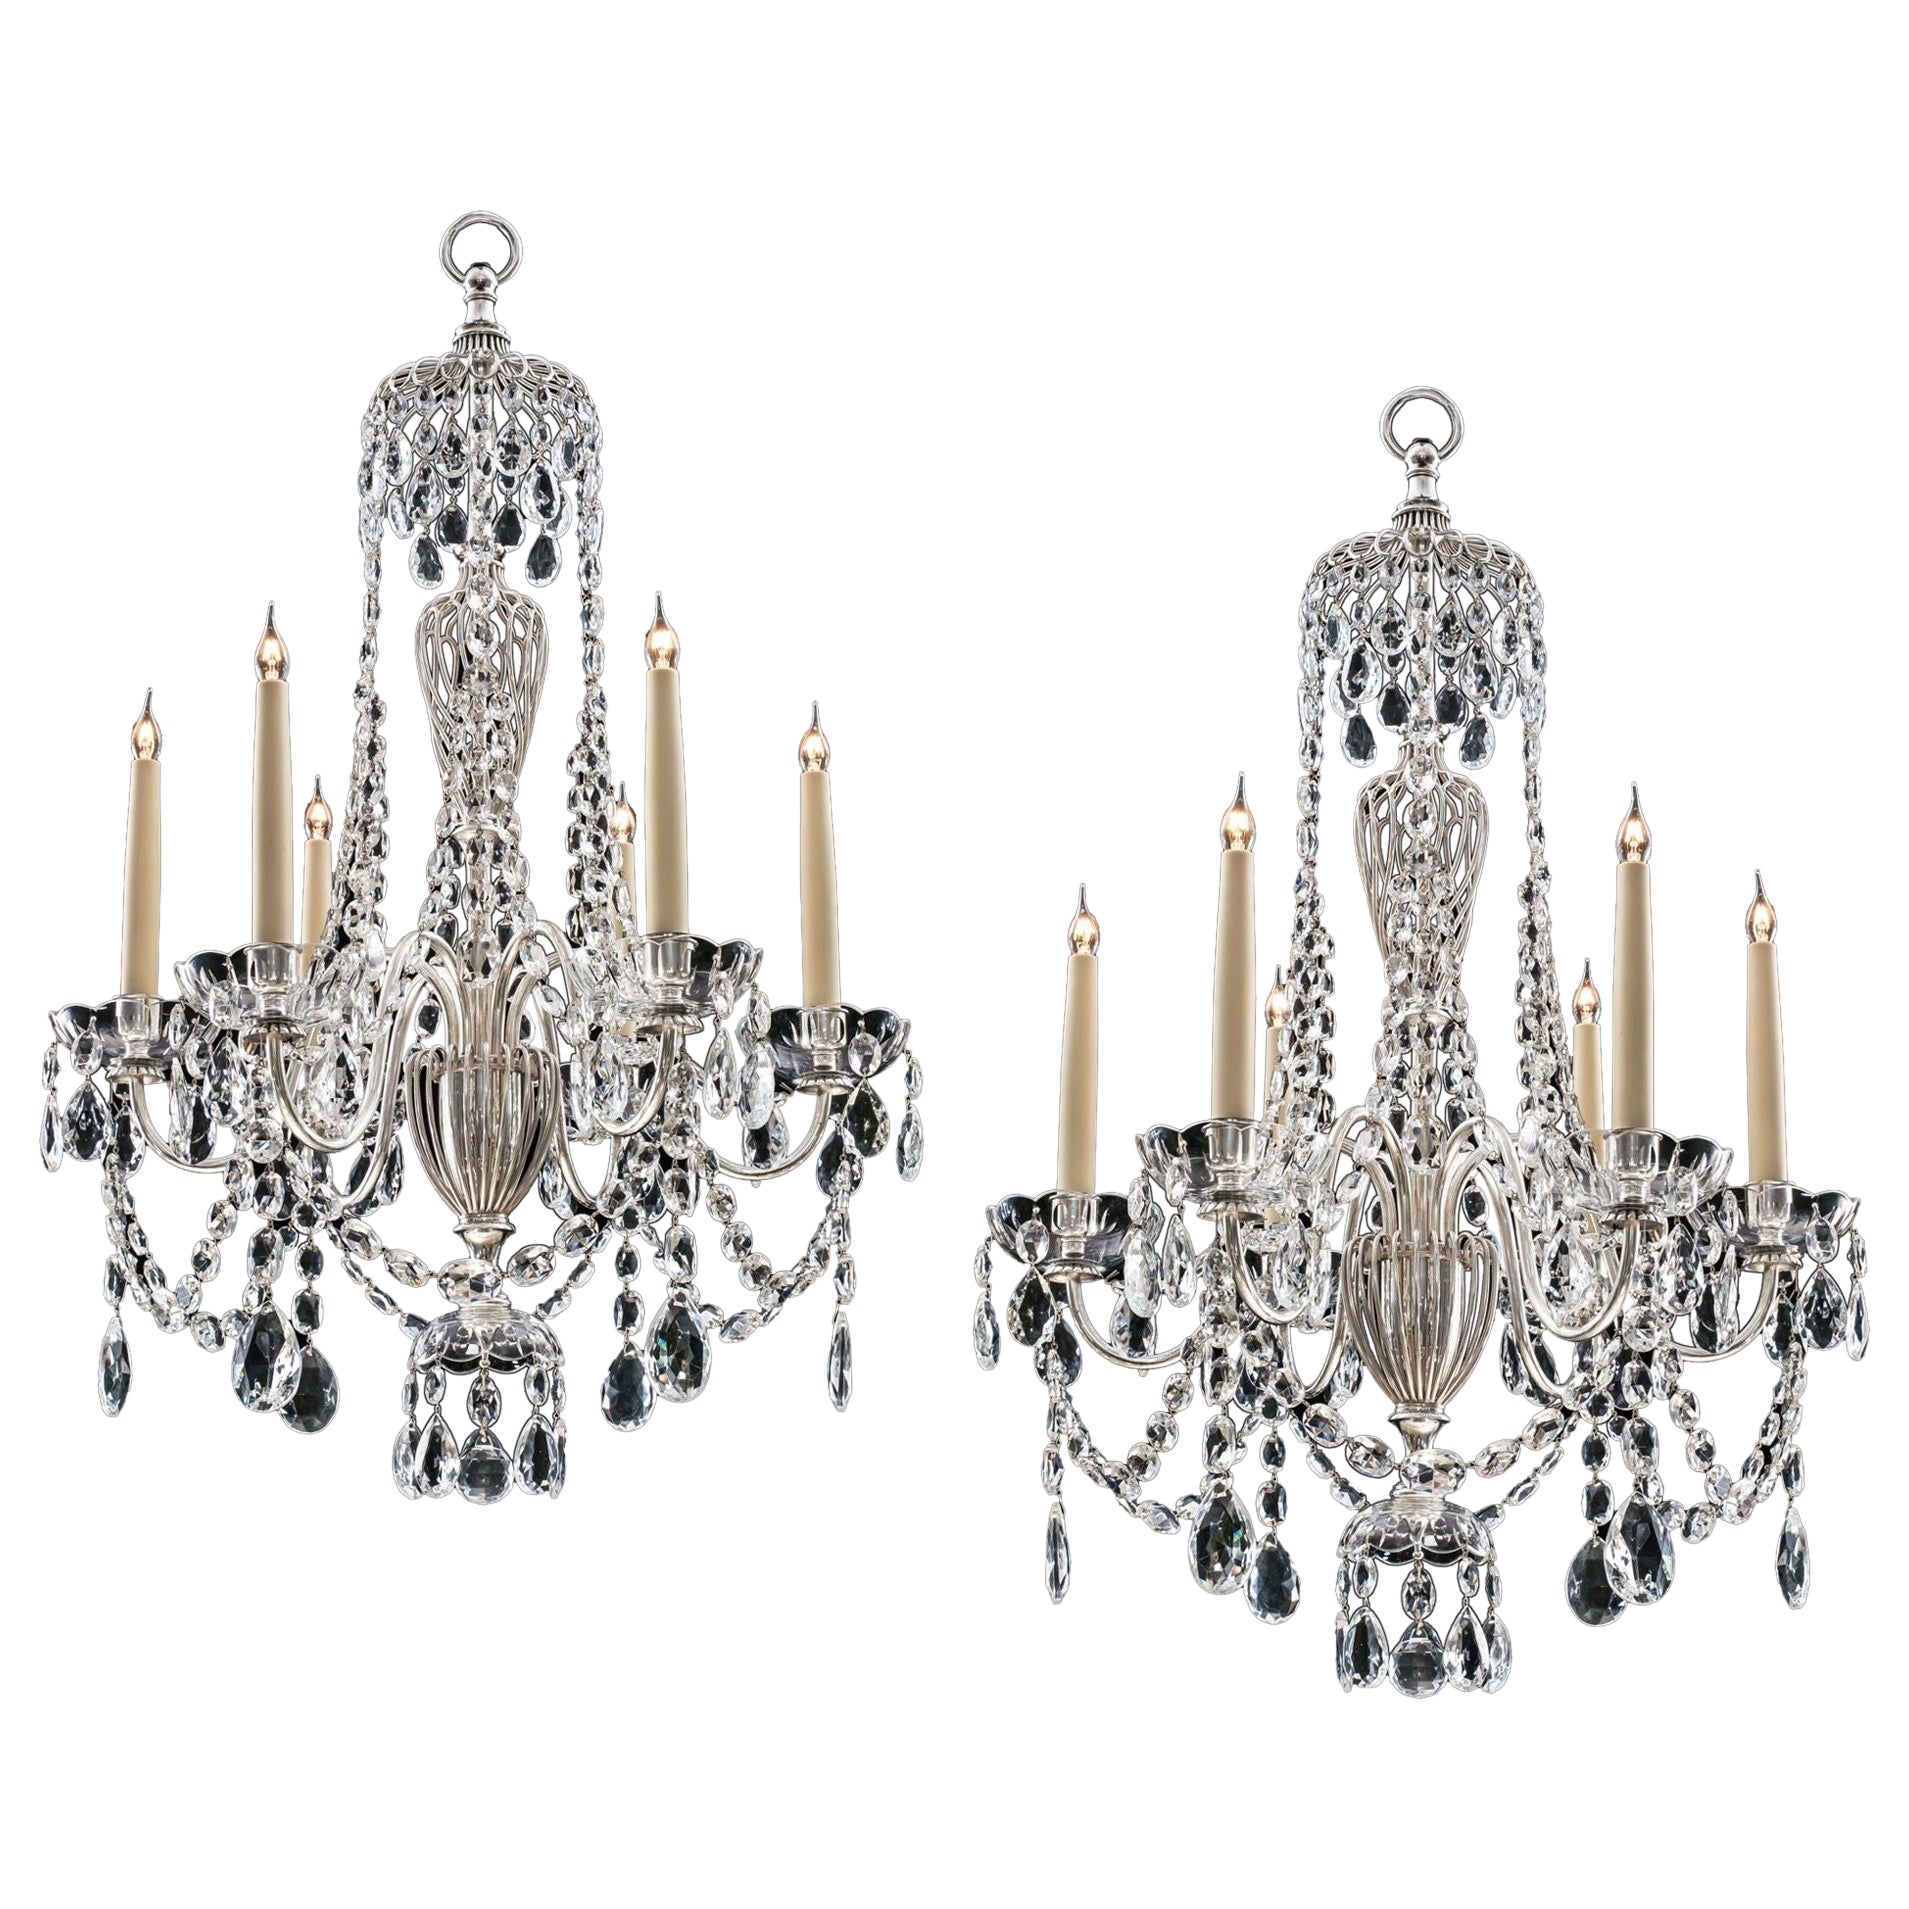 A Pair Of Silvered and Crystal Chandeliers By Osler & Faraday  For Sale